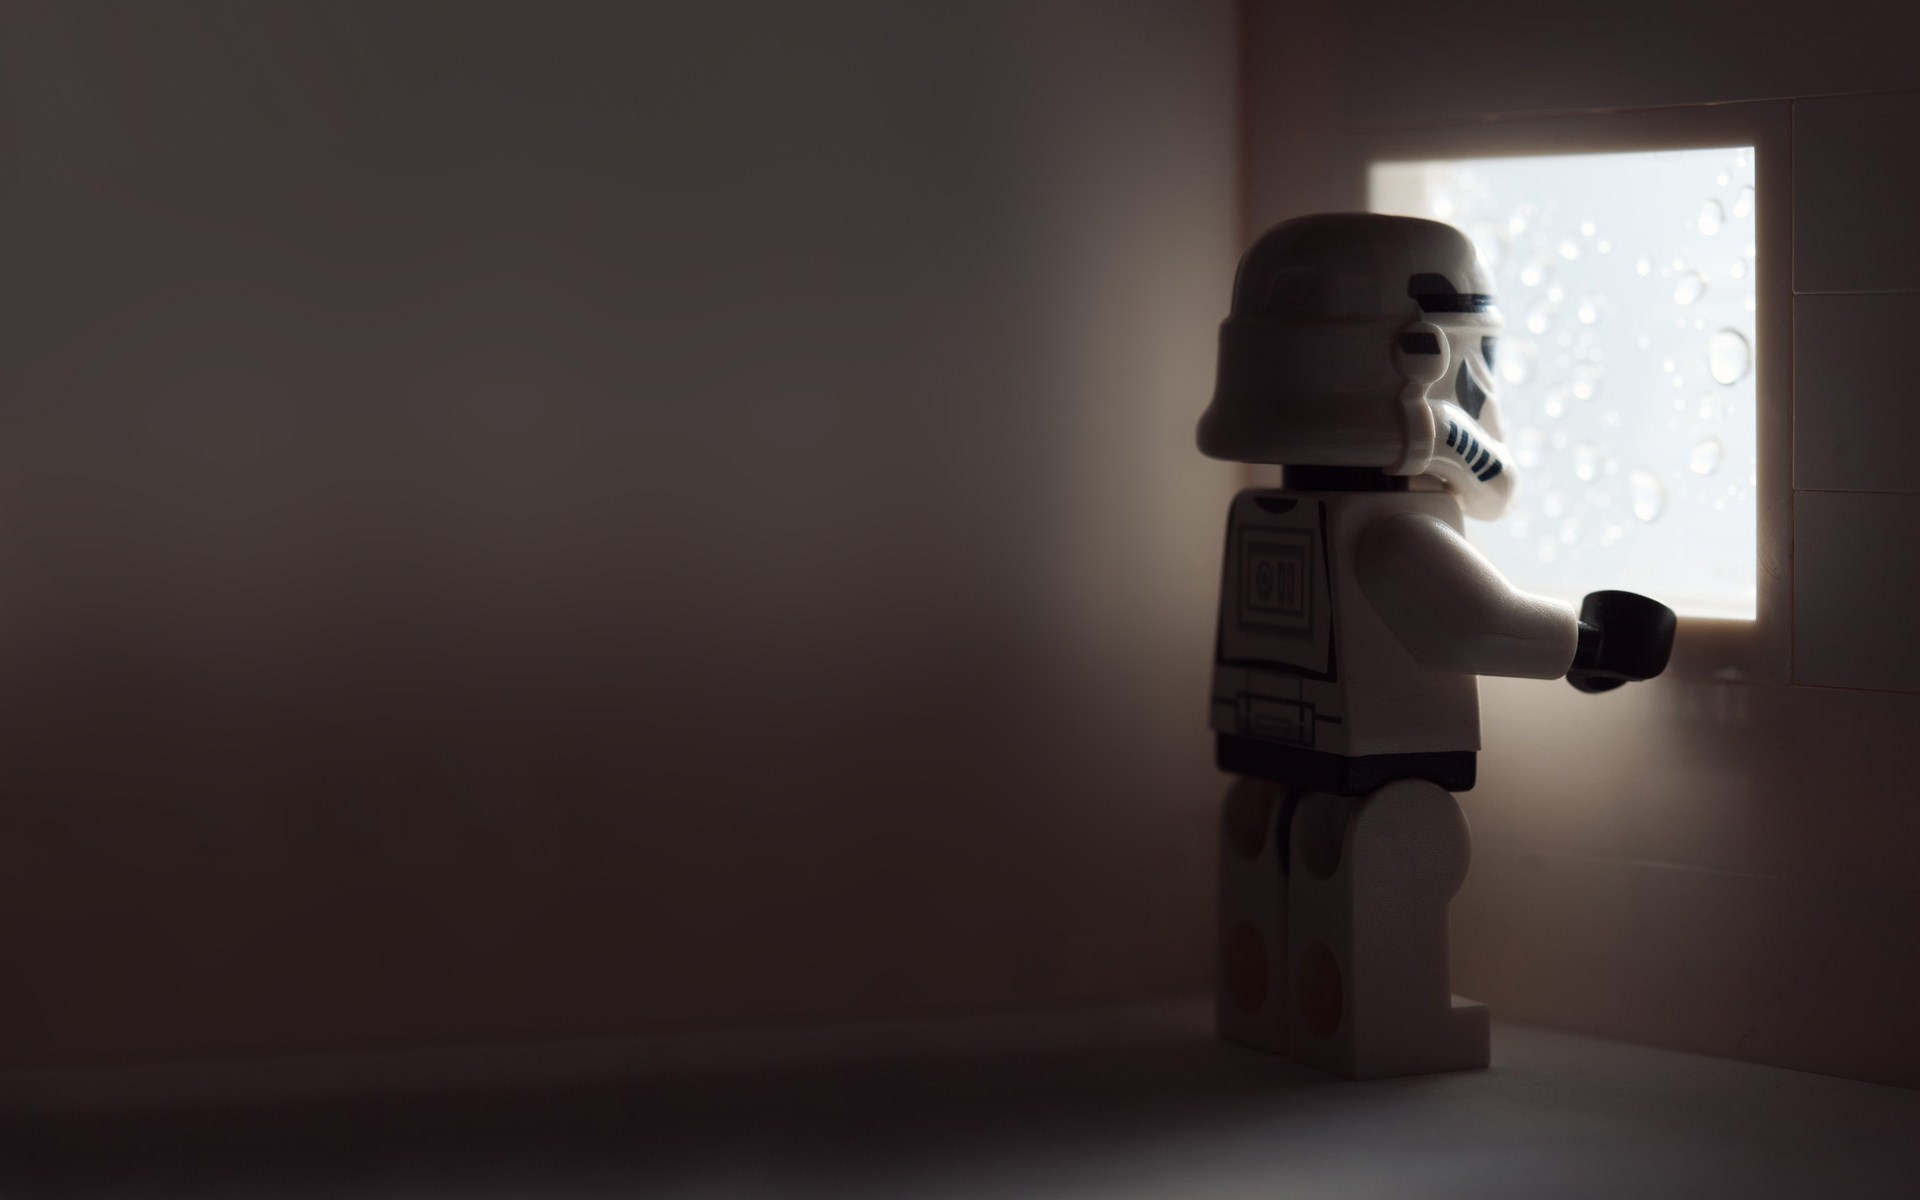 Cool Lego Wallpapers